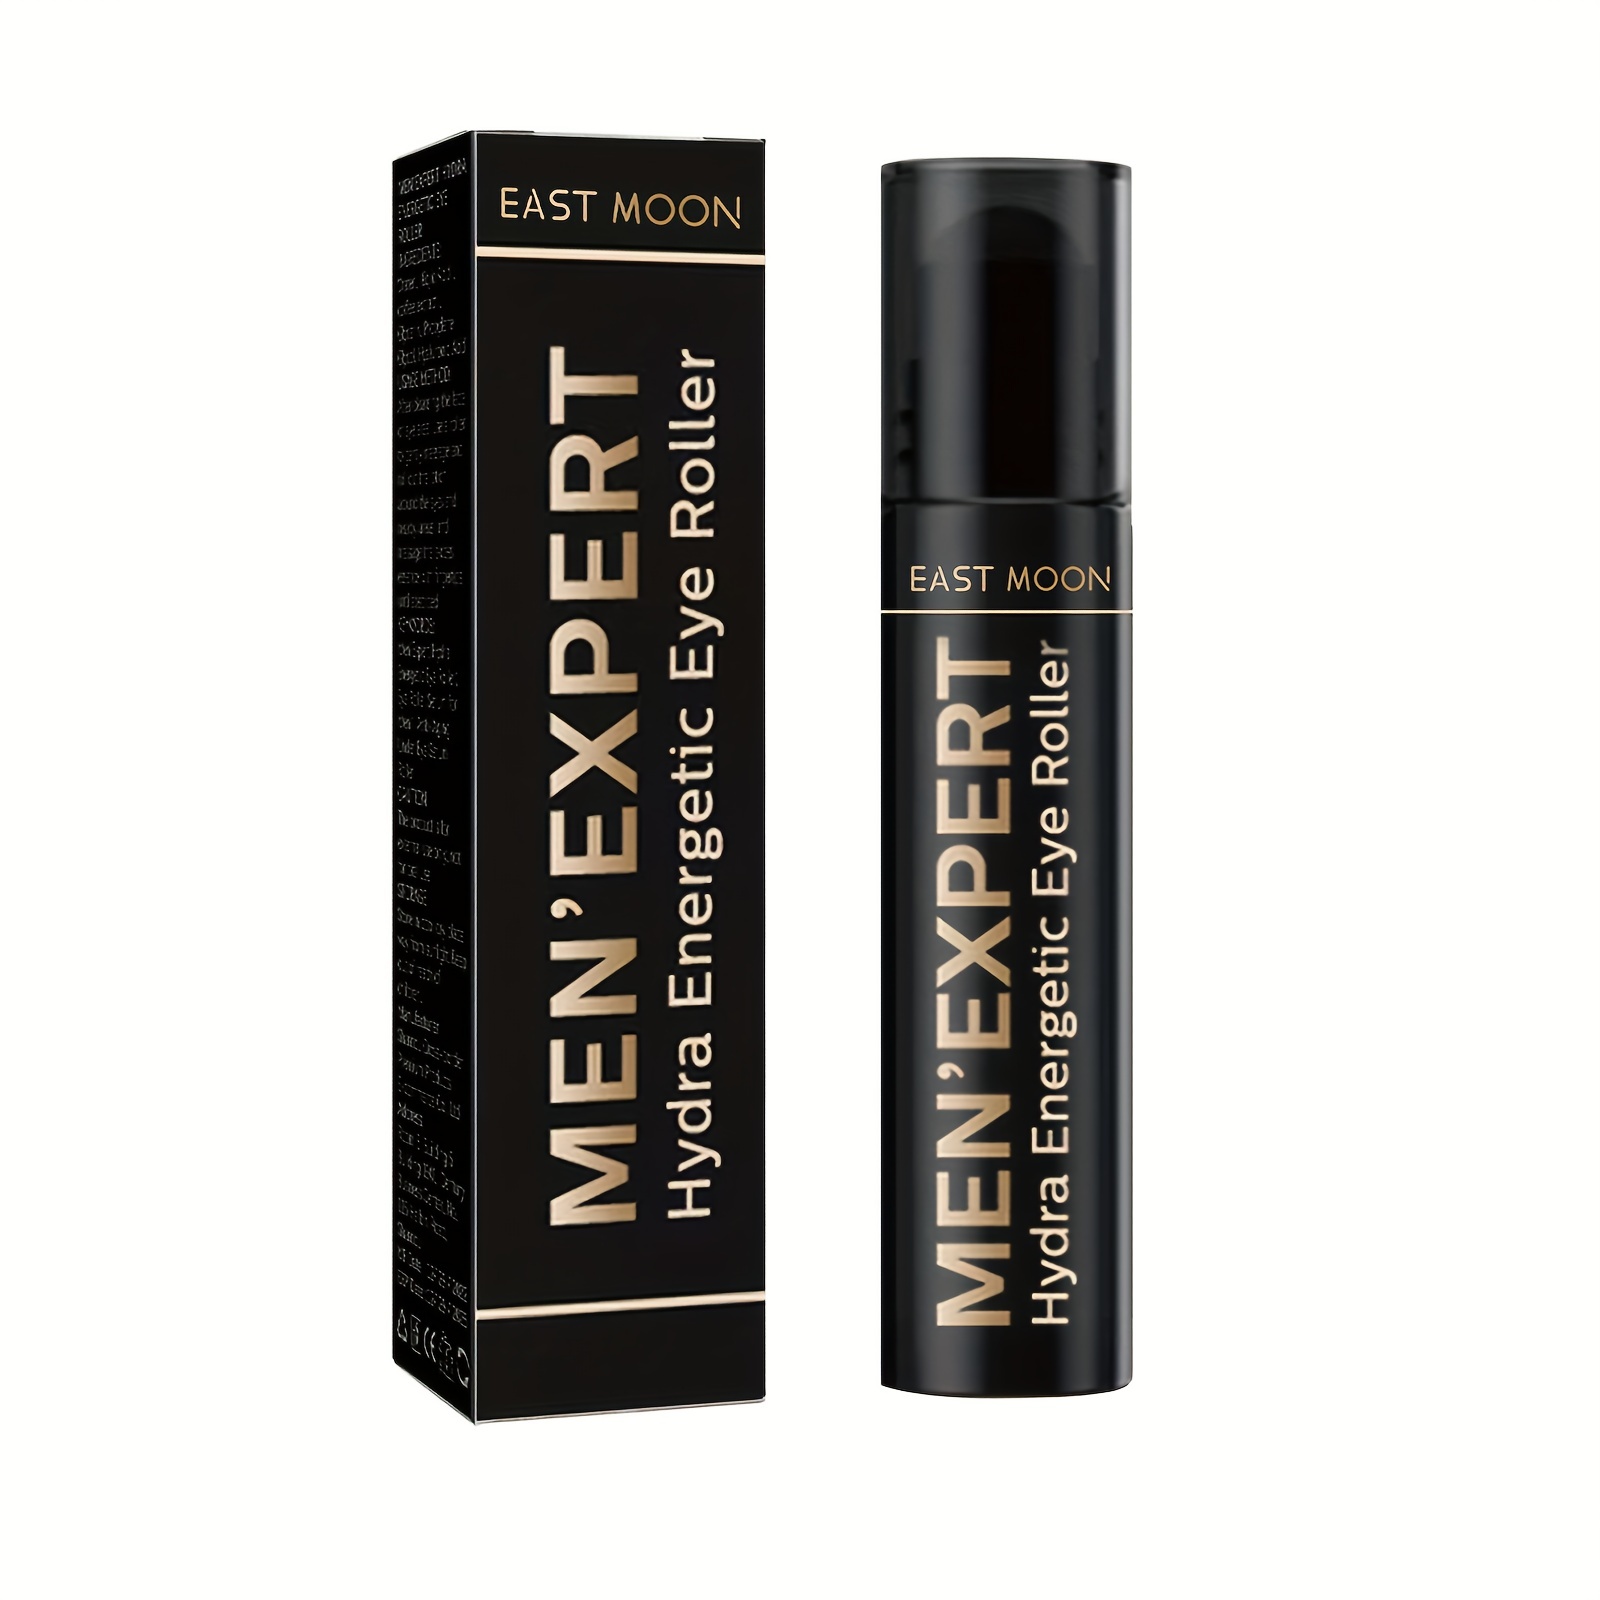 

10ml Men's Moisturizing Eye Roller Firms, Improves The Look Of Dark Circles, Fine Lines, And Lifts Eye Bags